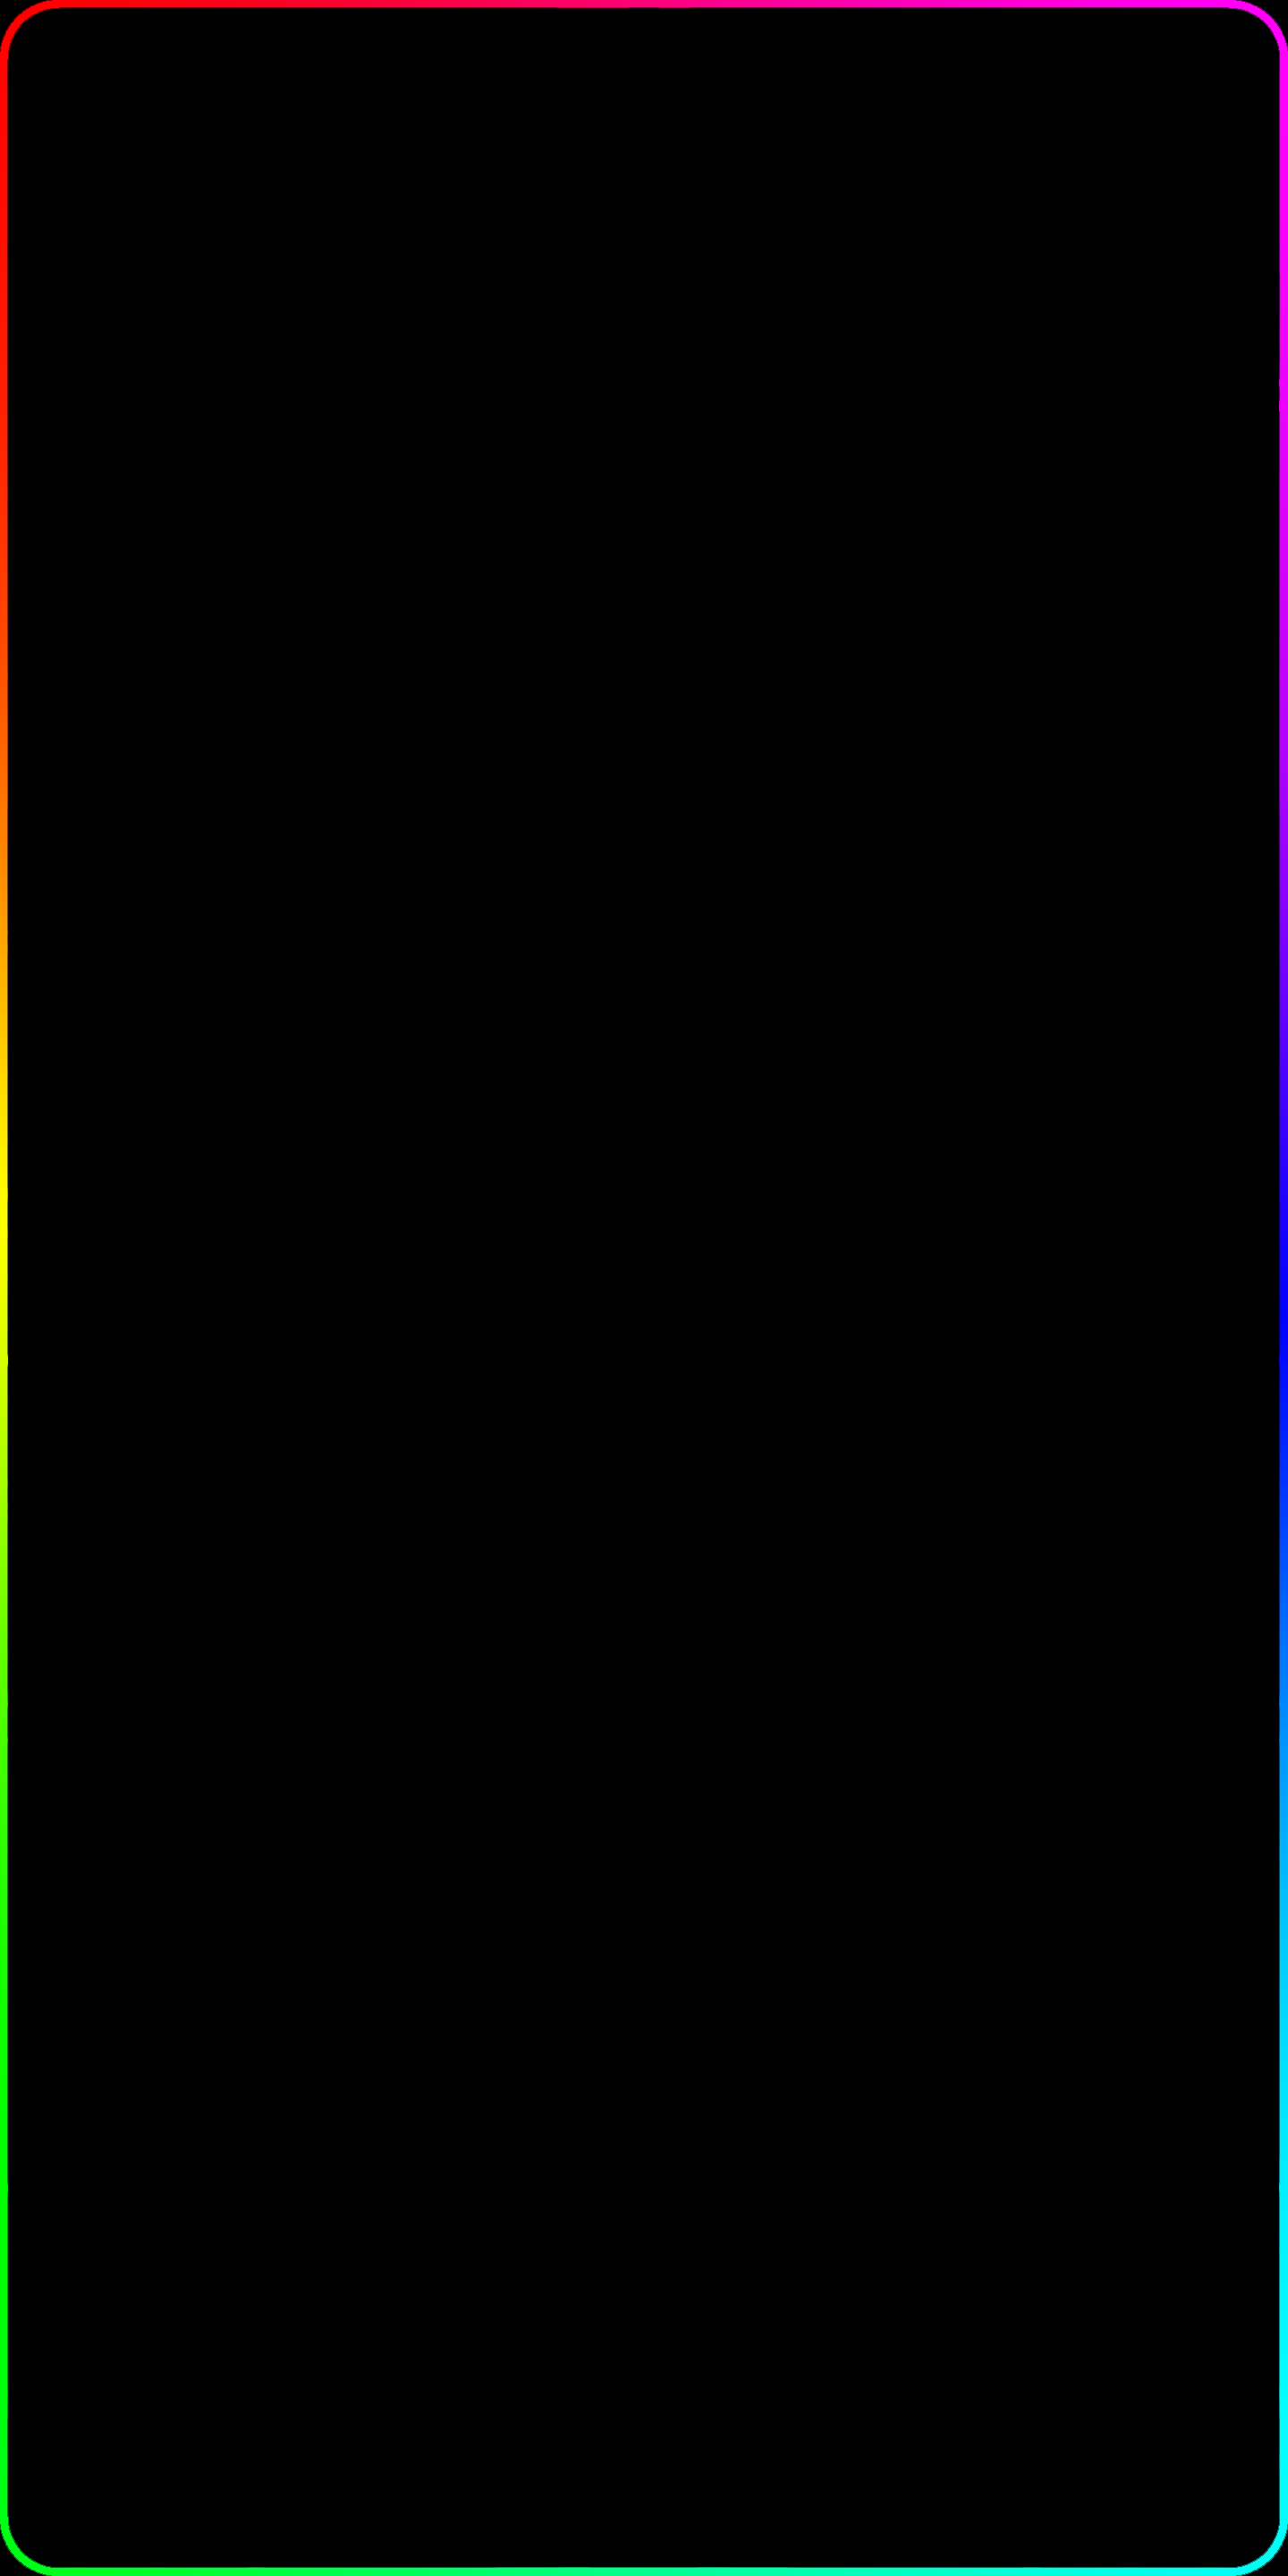 A Rainbow Border Wallpaper I Made For My Own G Thought The Subreddit May Appreciate It. If You Want Any Other Theme, Feel Free To Request!